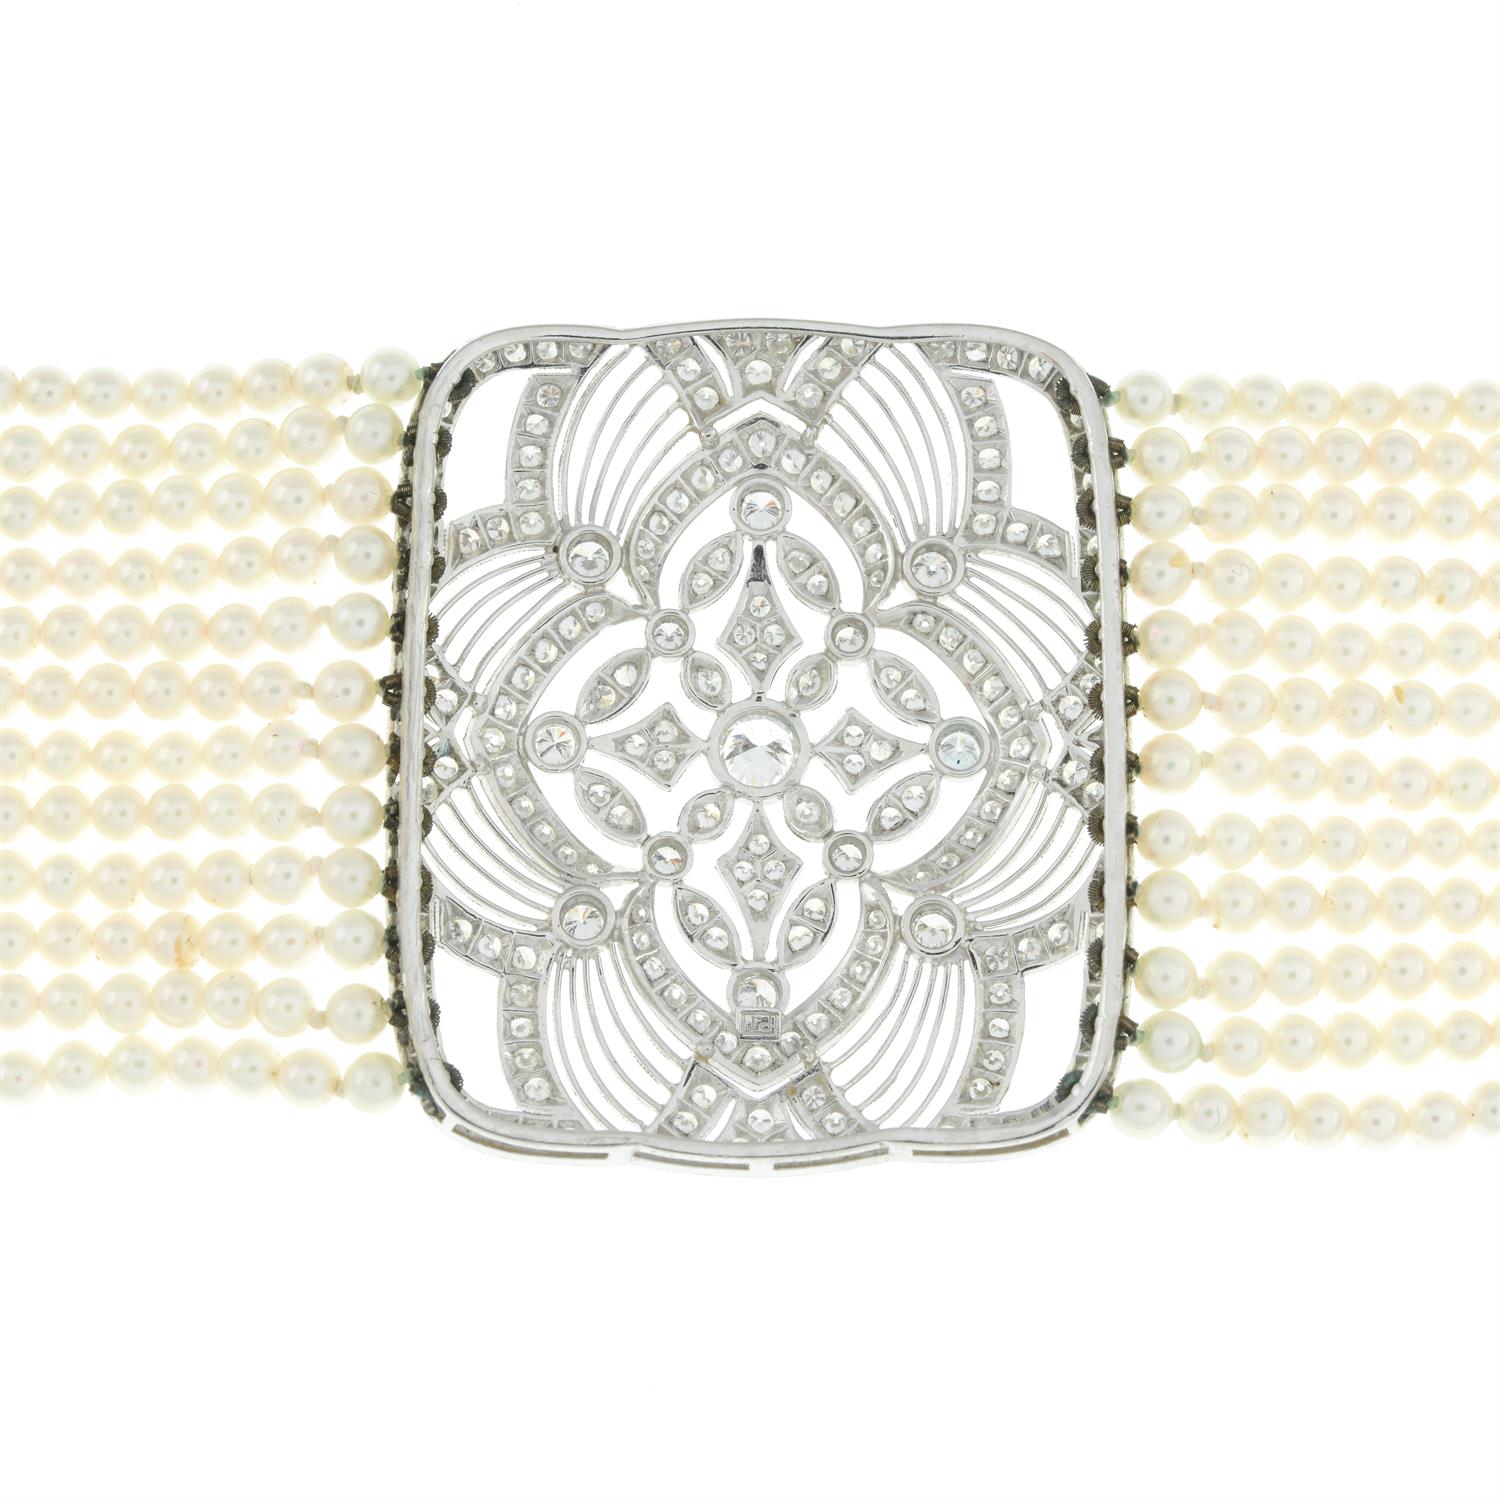 Seed pearl and diamond choker necklace, by Adler - Image 6 of 6